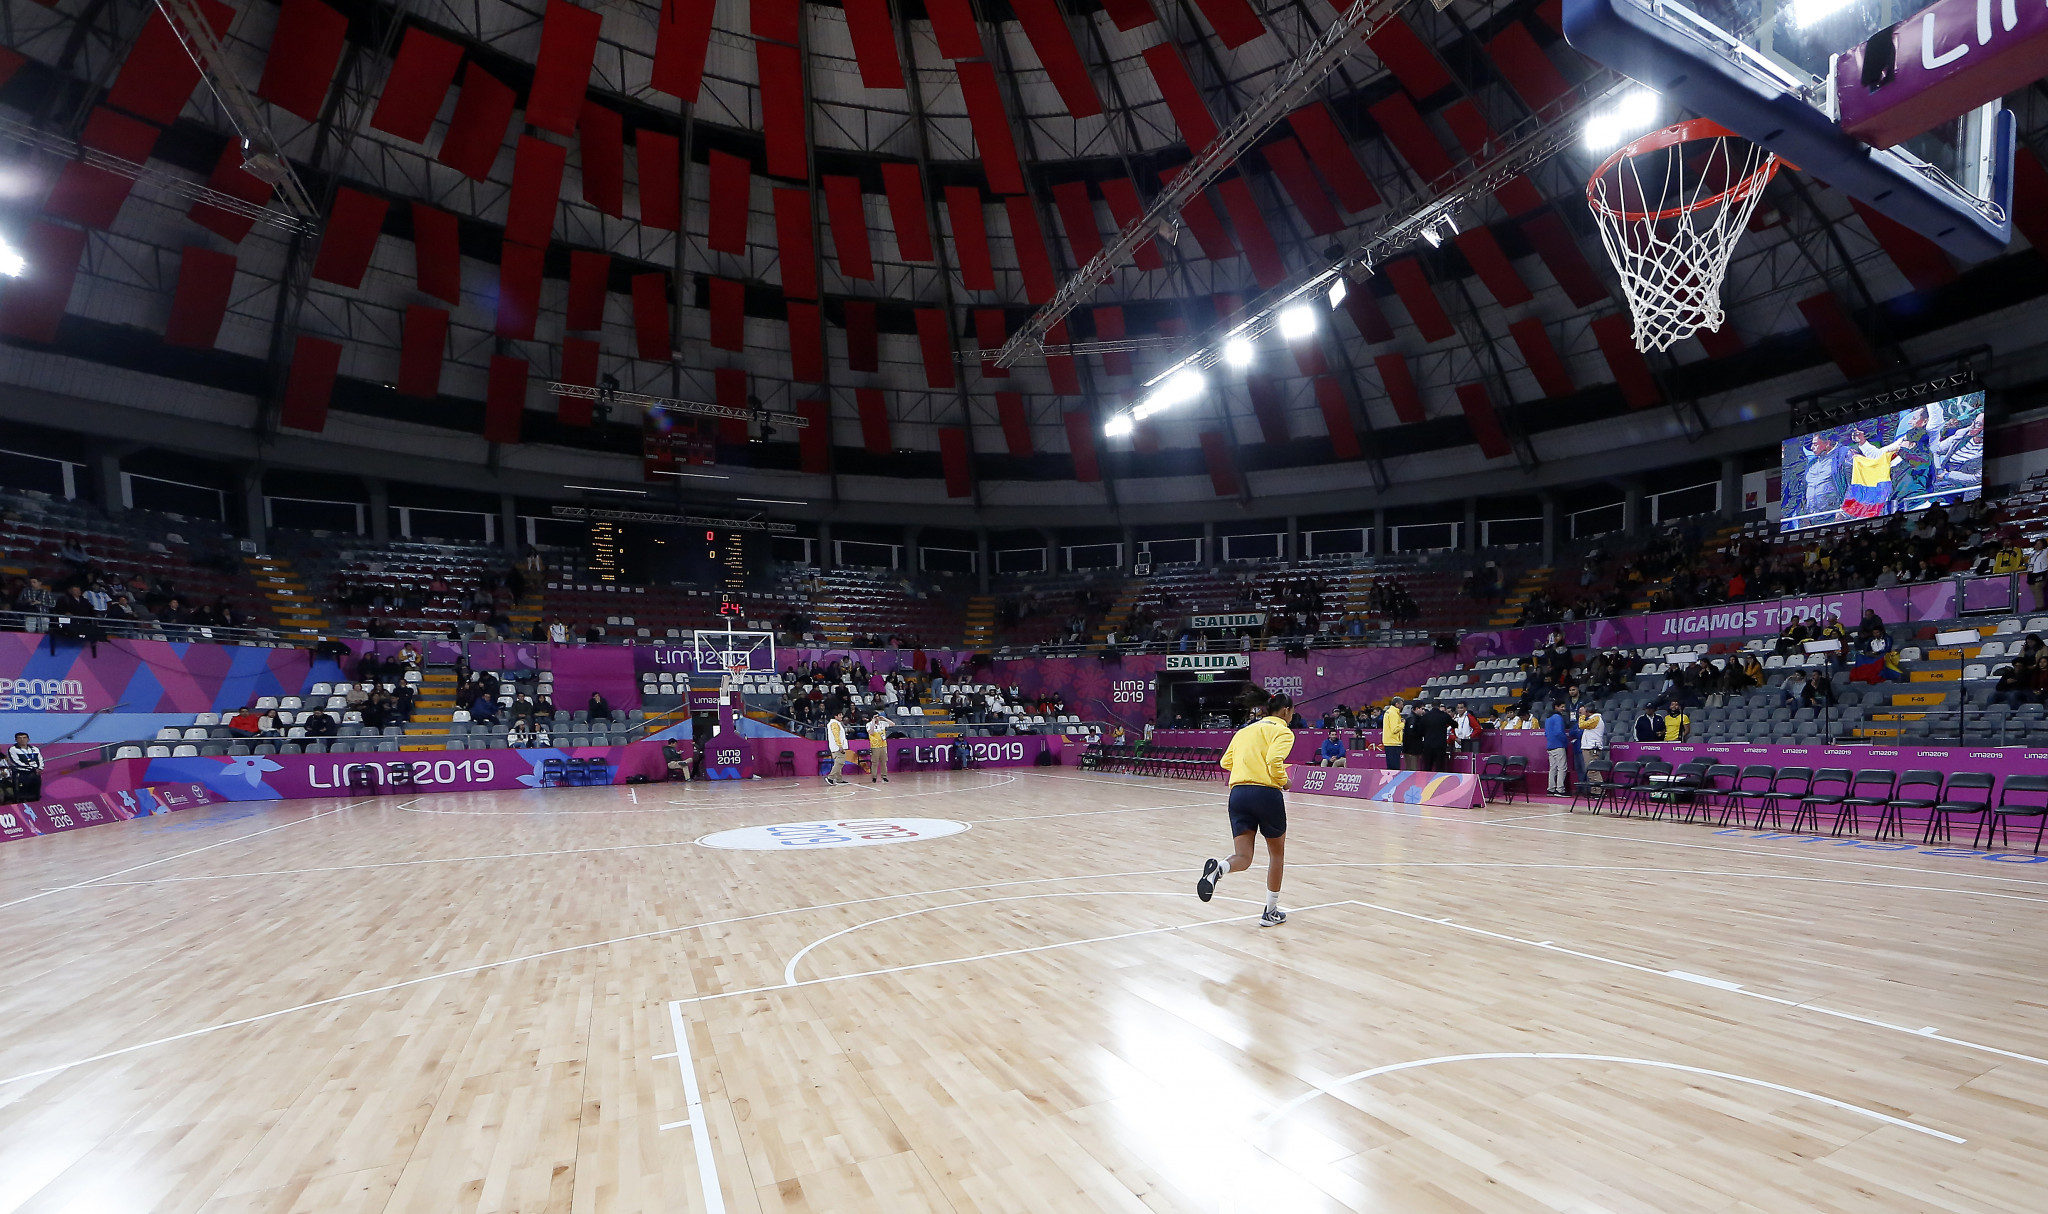 Colombia were awarded a walkover in women's basketball after Argentina had the wrong kit ©Lima 2019